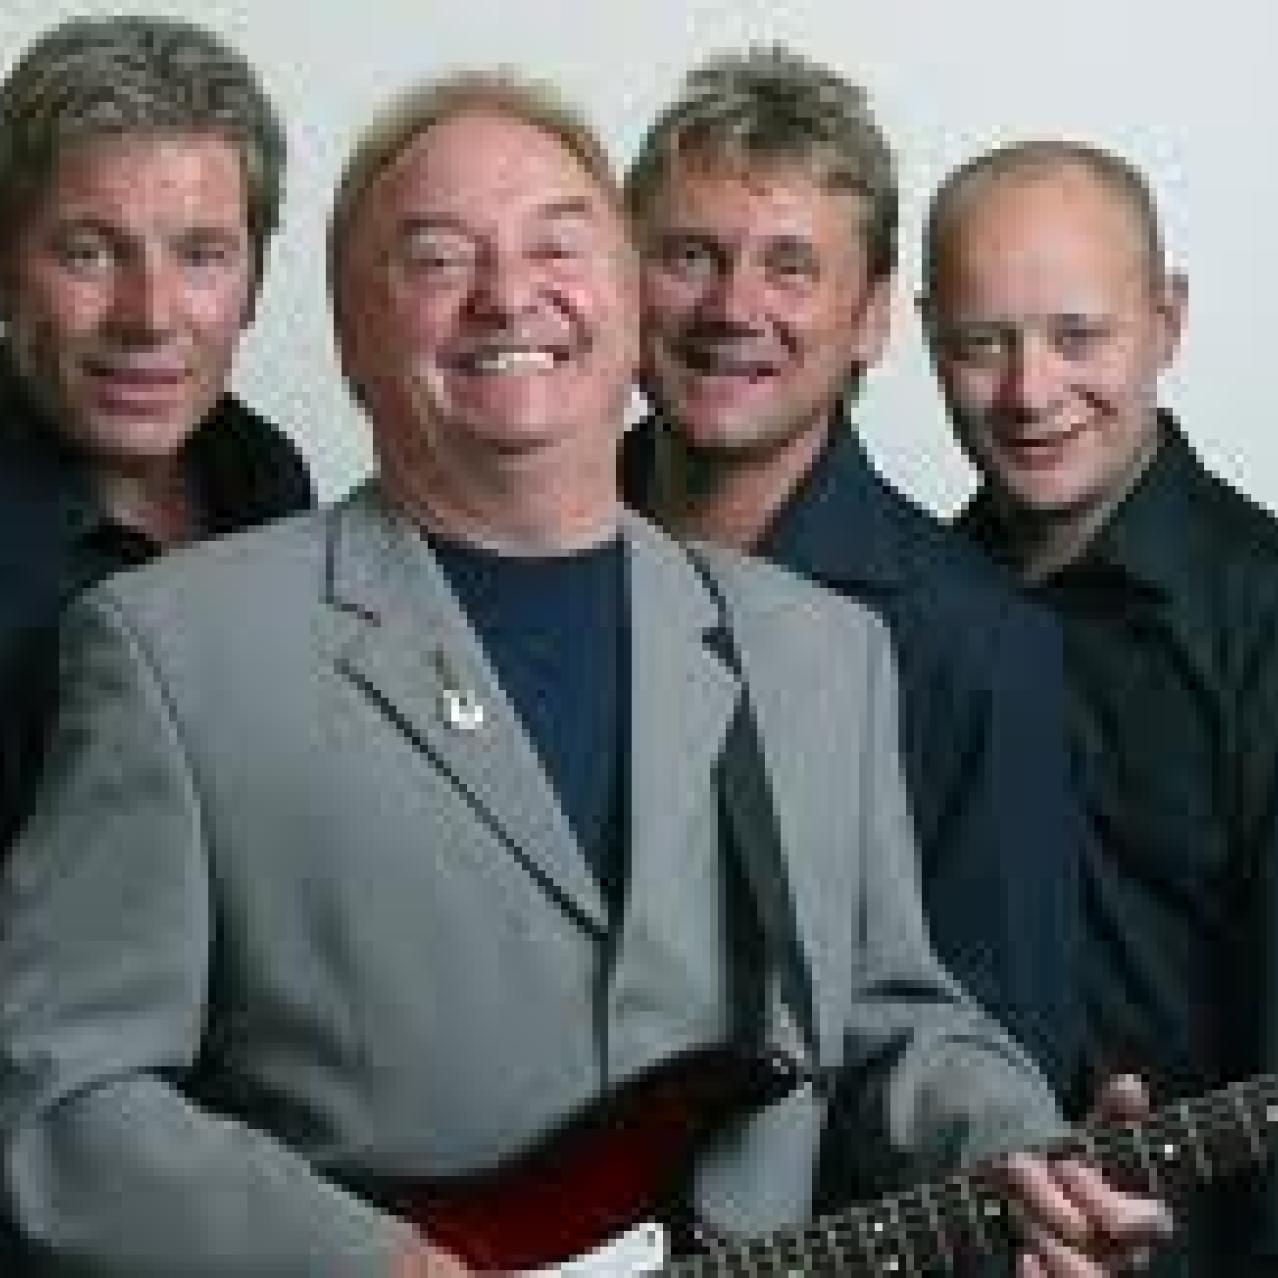 Gerry & the Pacemakers